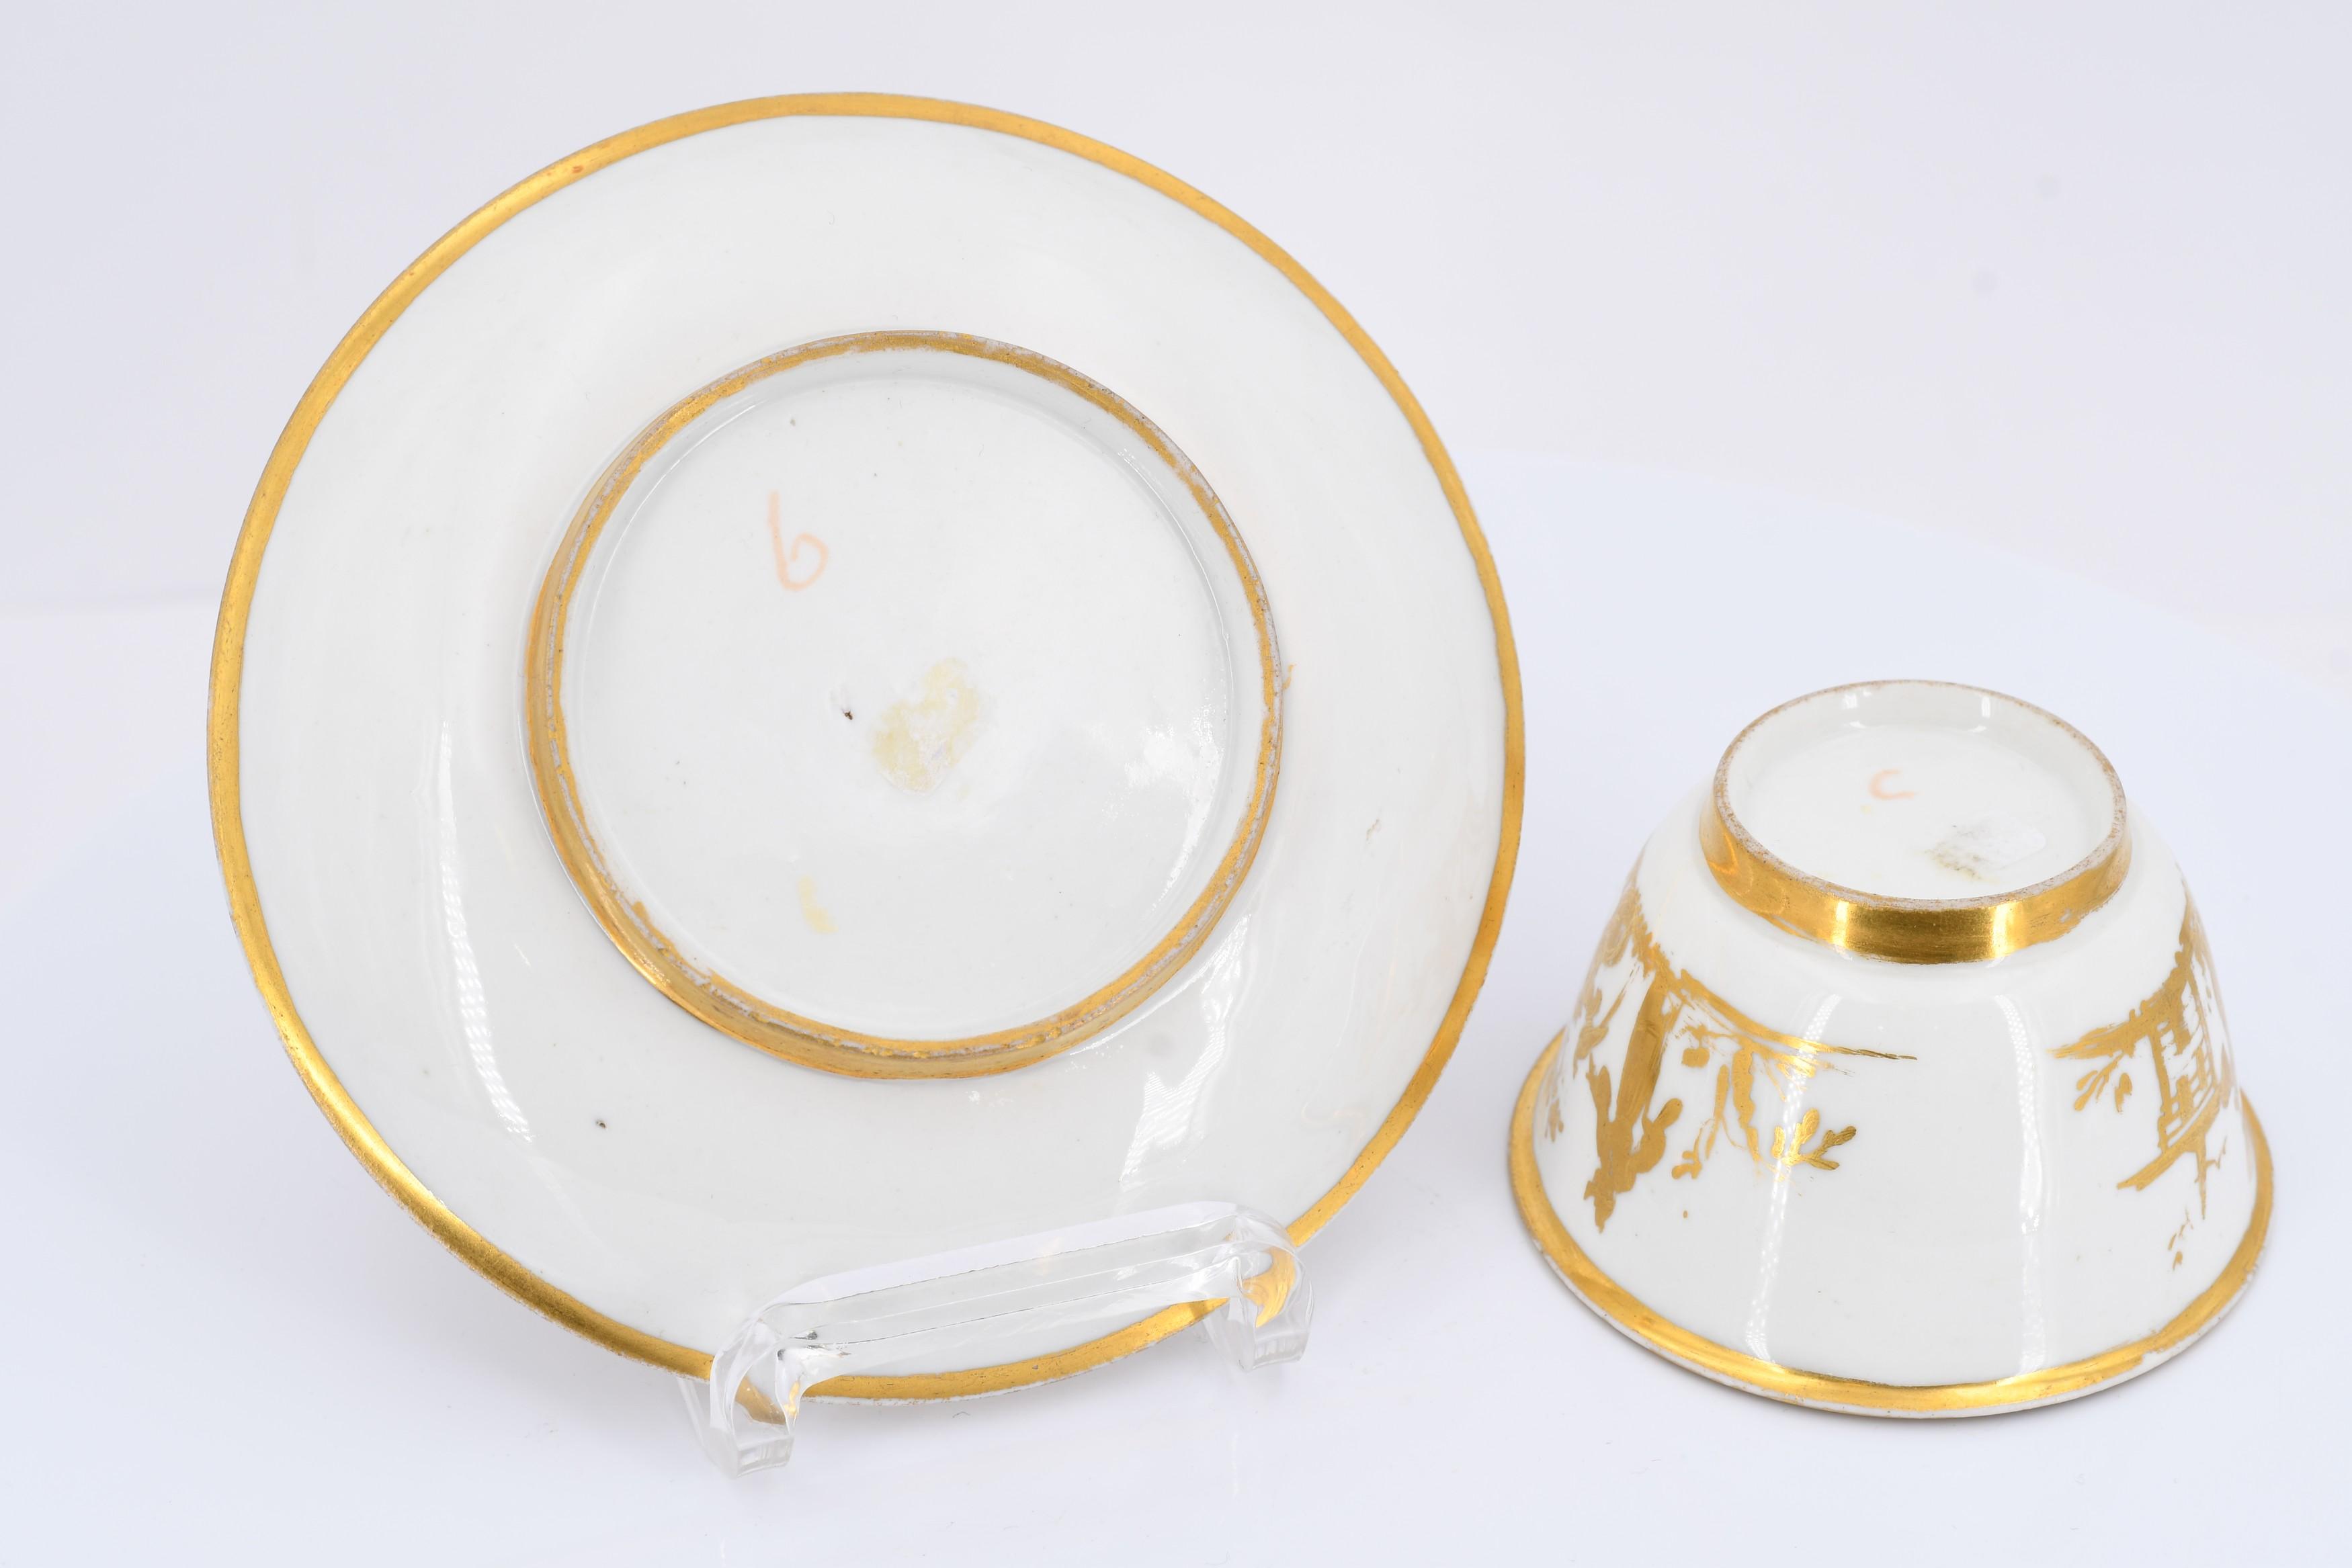 Tea bowl and saucer with gold Chinese décor - Image 7 of 7